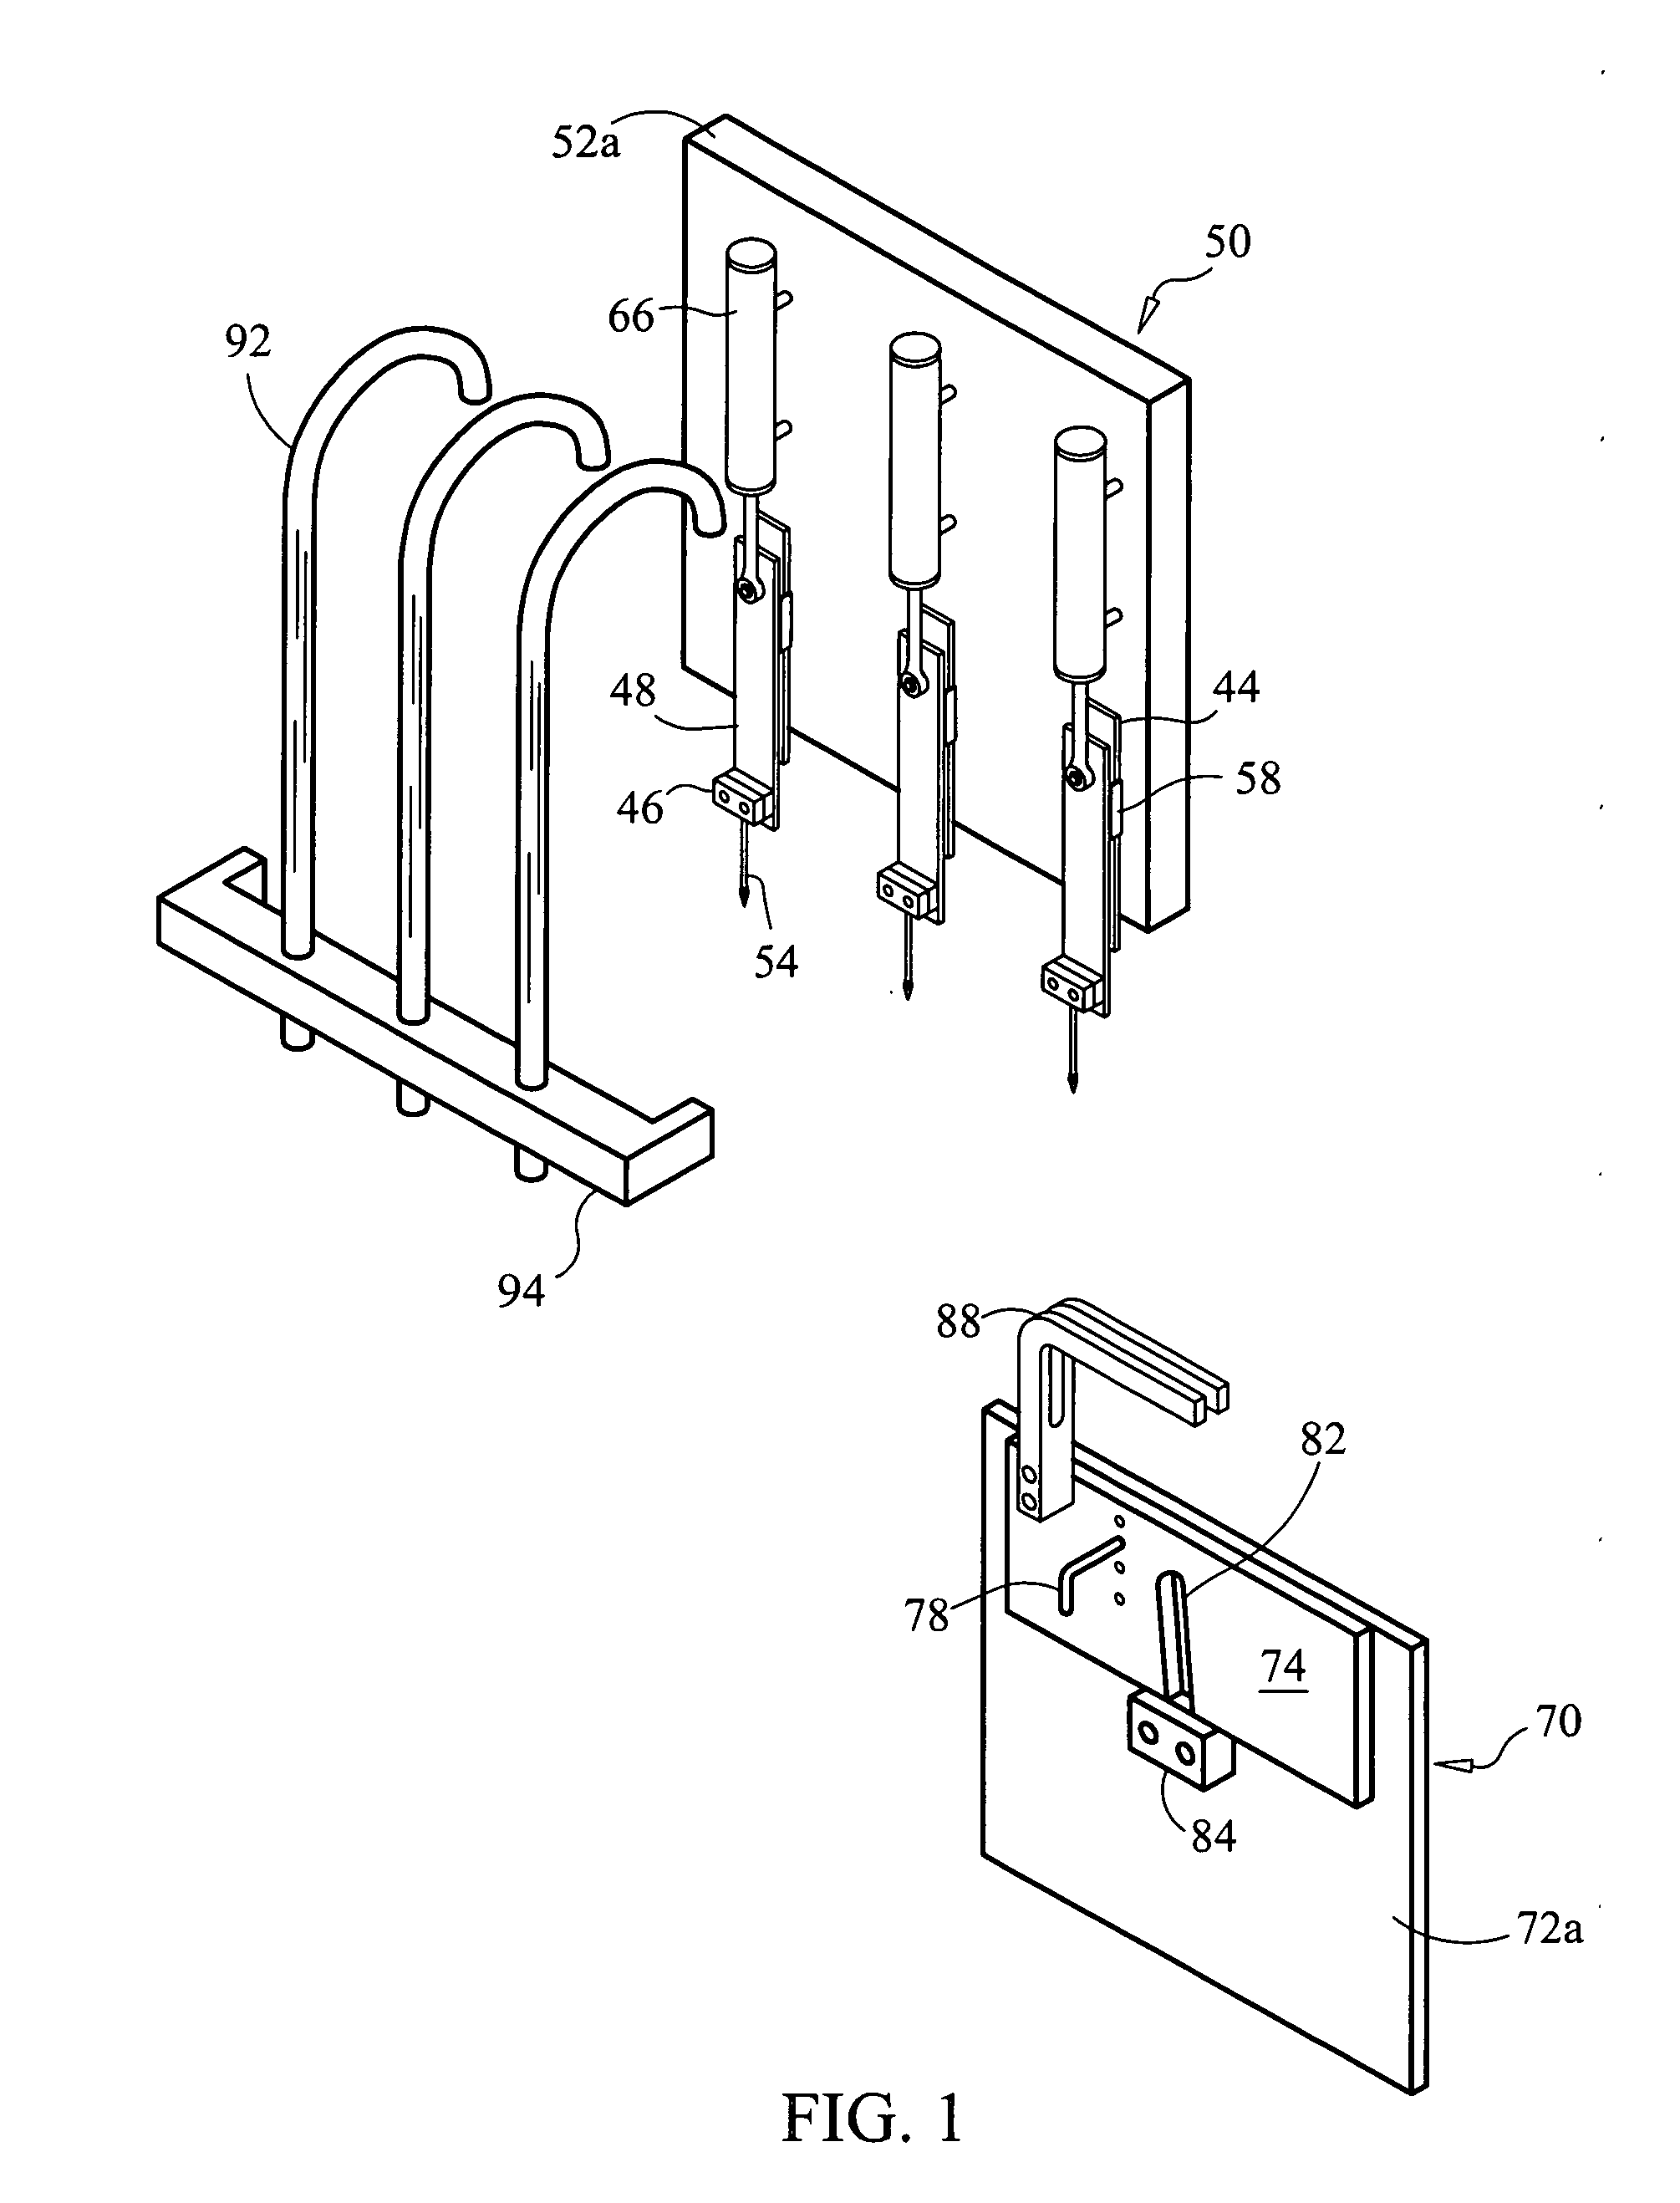 Tufting machine for producing athletic turf having a graphic design